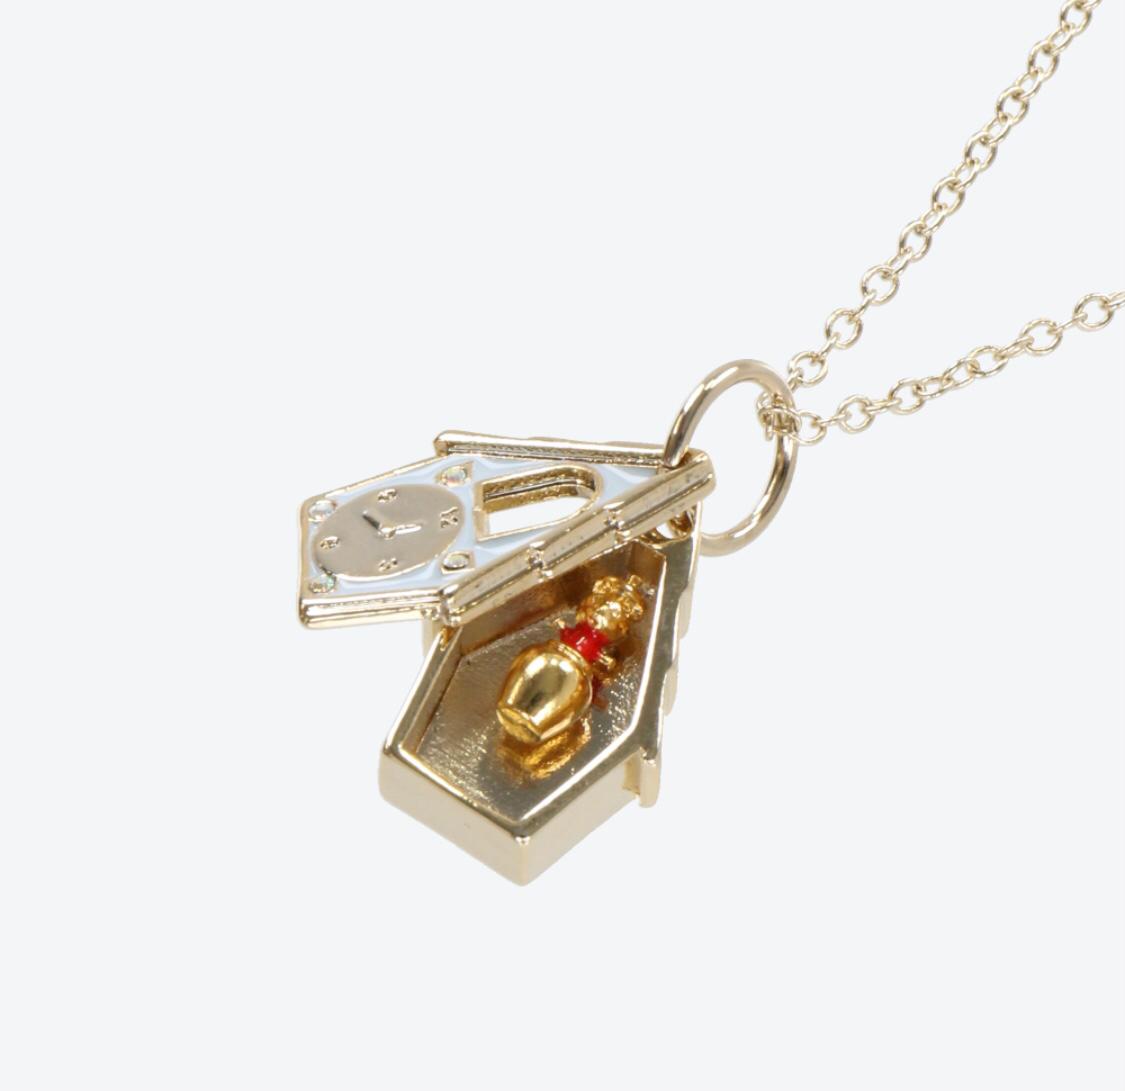 TDR - Winnie the Pooh Necklace